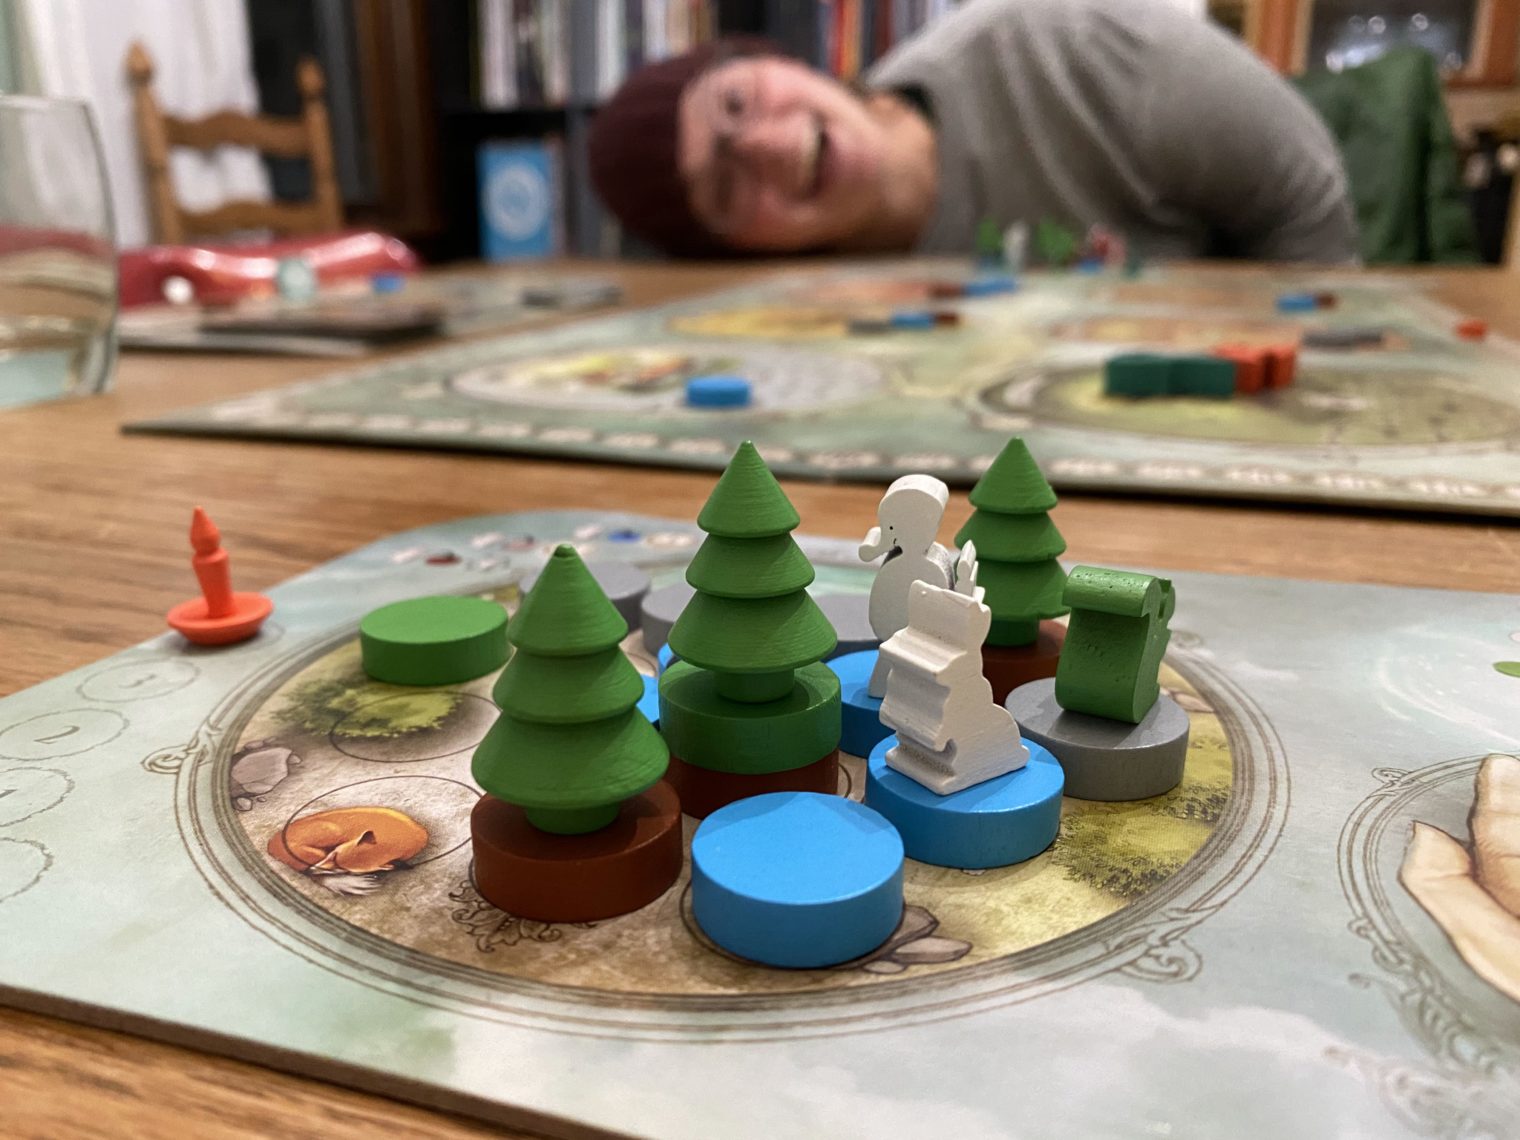 Boardgame set up in foreground. Person leaning over smiling in background slightly out of focus.